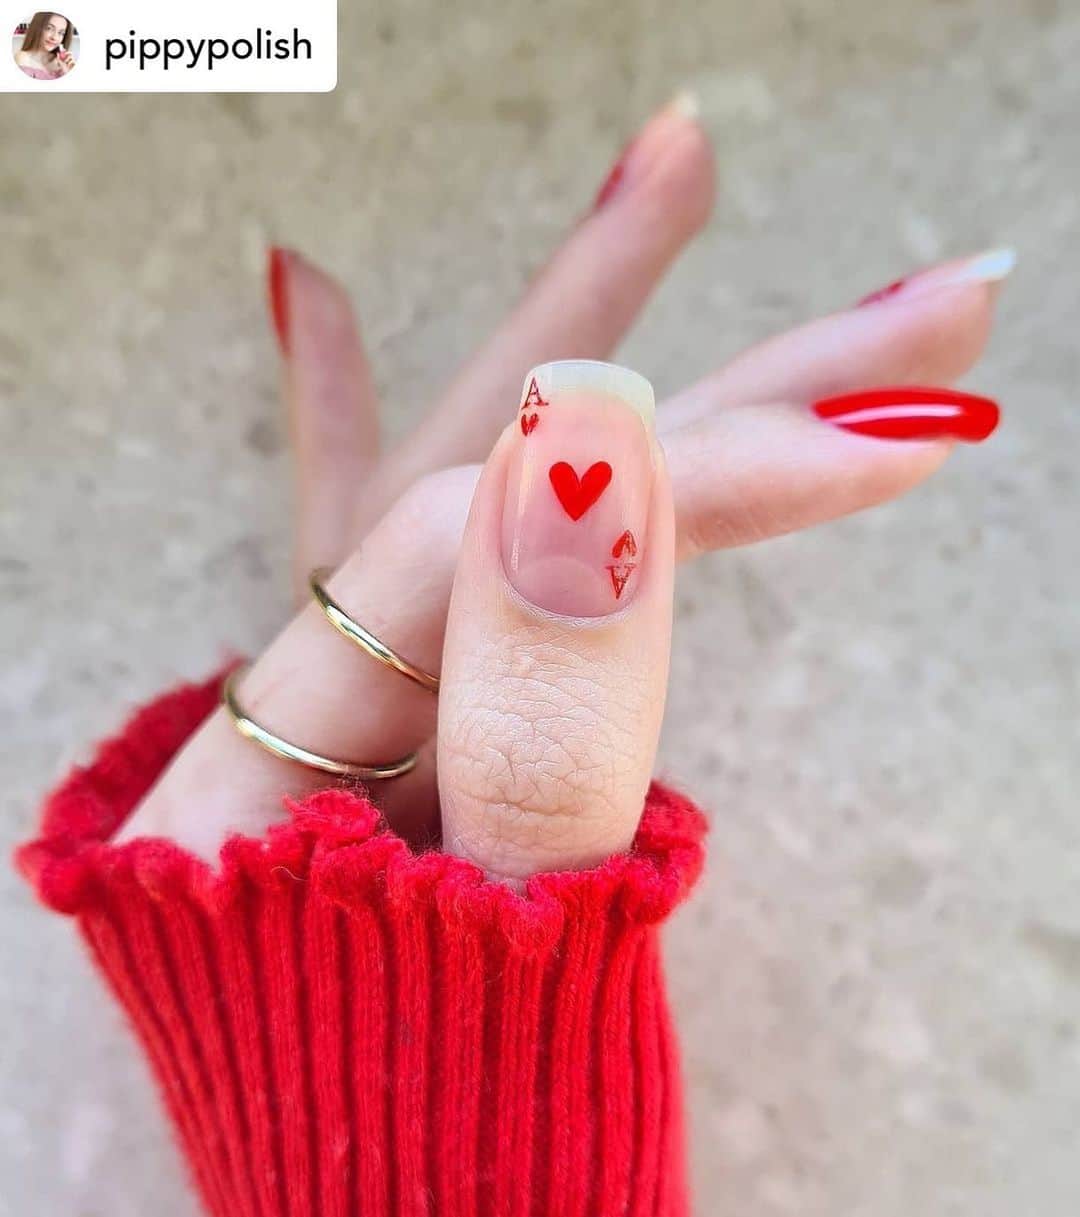 Nail Designsのインスタグラム：「Credit• @pippypolish Leave a ❤ if you love this valentines mani! ⠀⠀⠀⠀⠀⠀⠀⠀⠀ Inspired by the amazing: @betina_goldstein ⭐ ⠀⠀⠀⠀⠀⠀⠀⠀⠀ Products I used: Orly - basecoat Orly - cherry bomb」